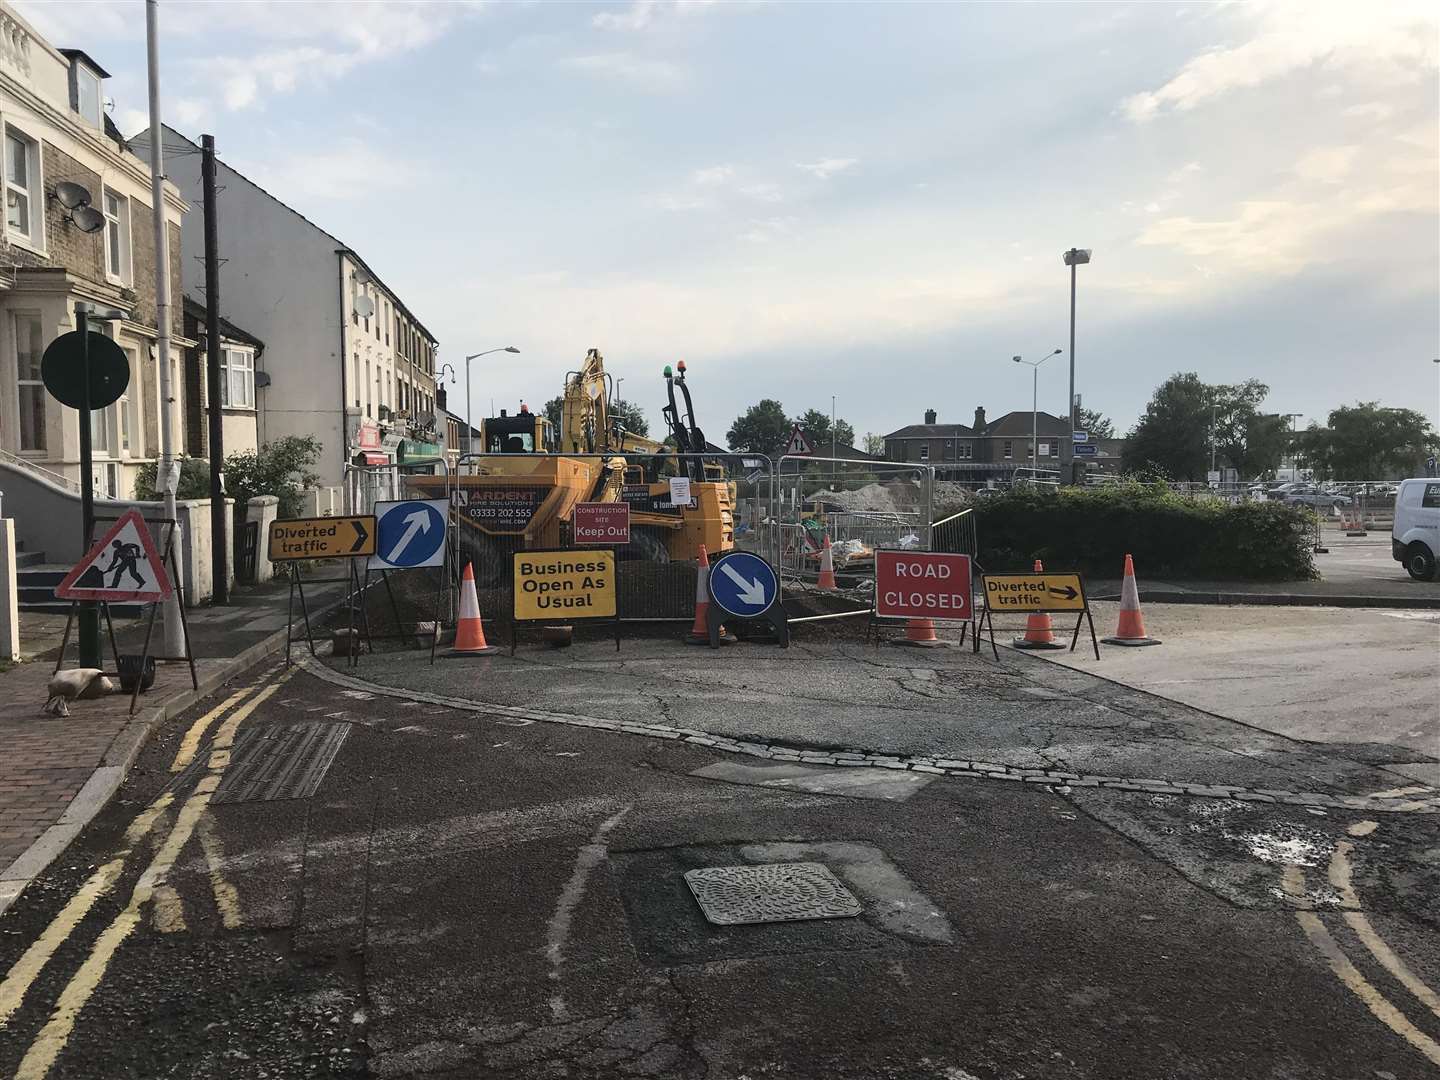 Previous roadworks carried out as part of the Sittingbourne town centre regeneration